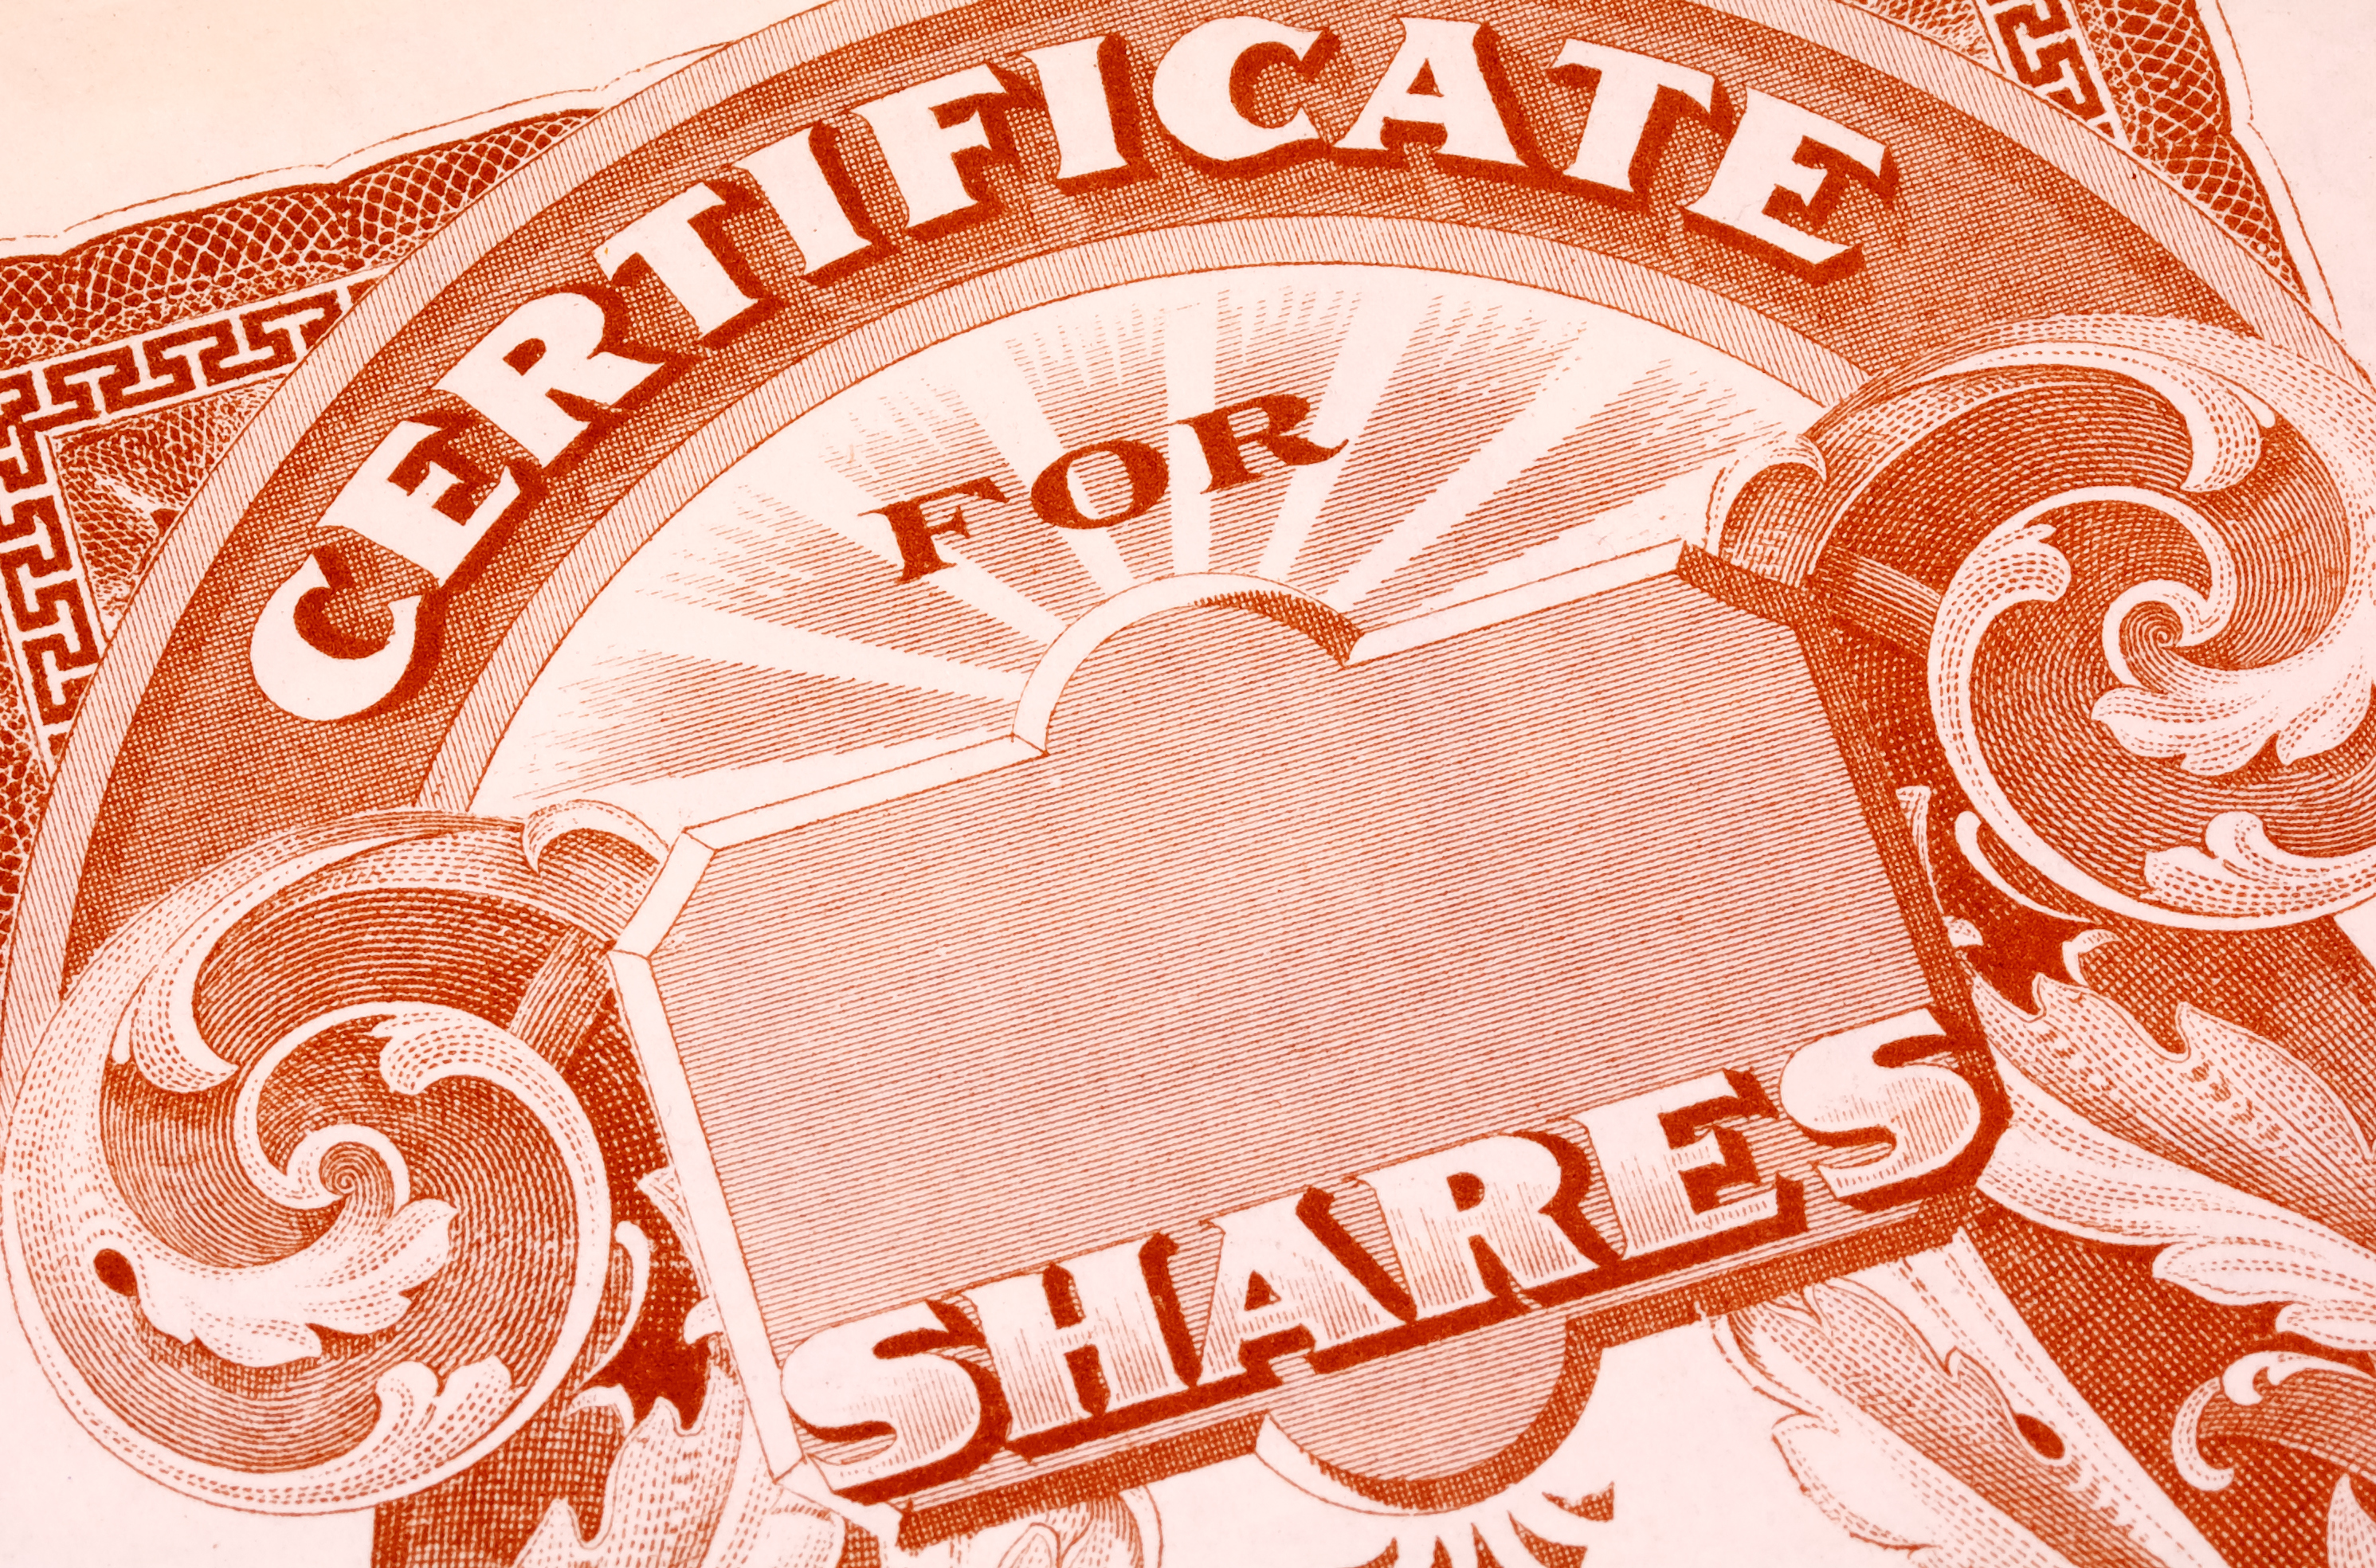 A blank paper certificate for shares of a publicly traded company.